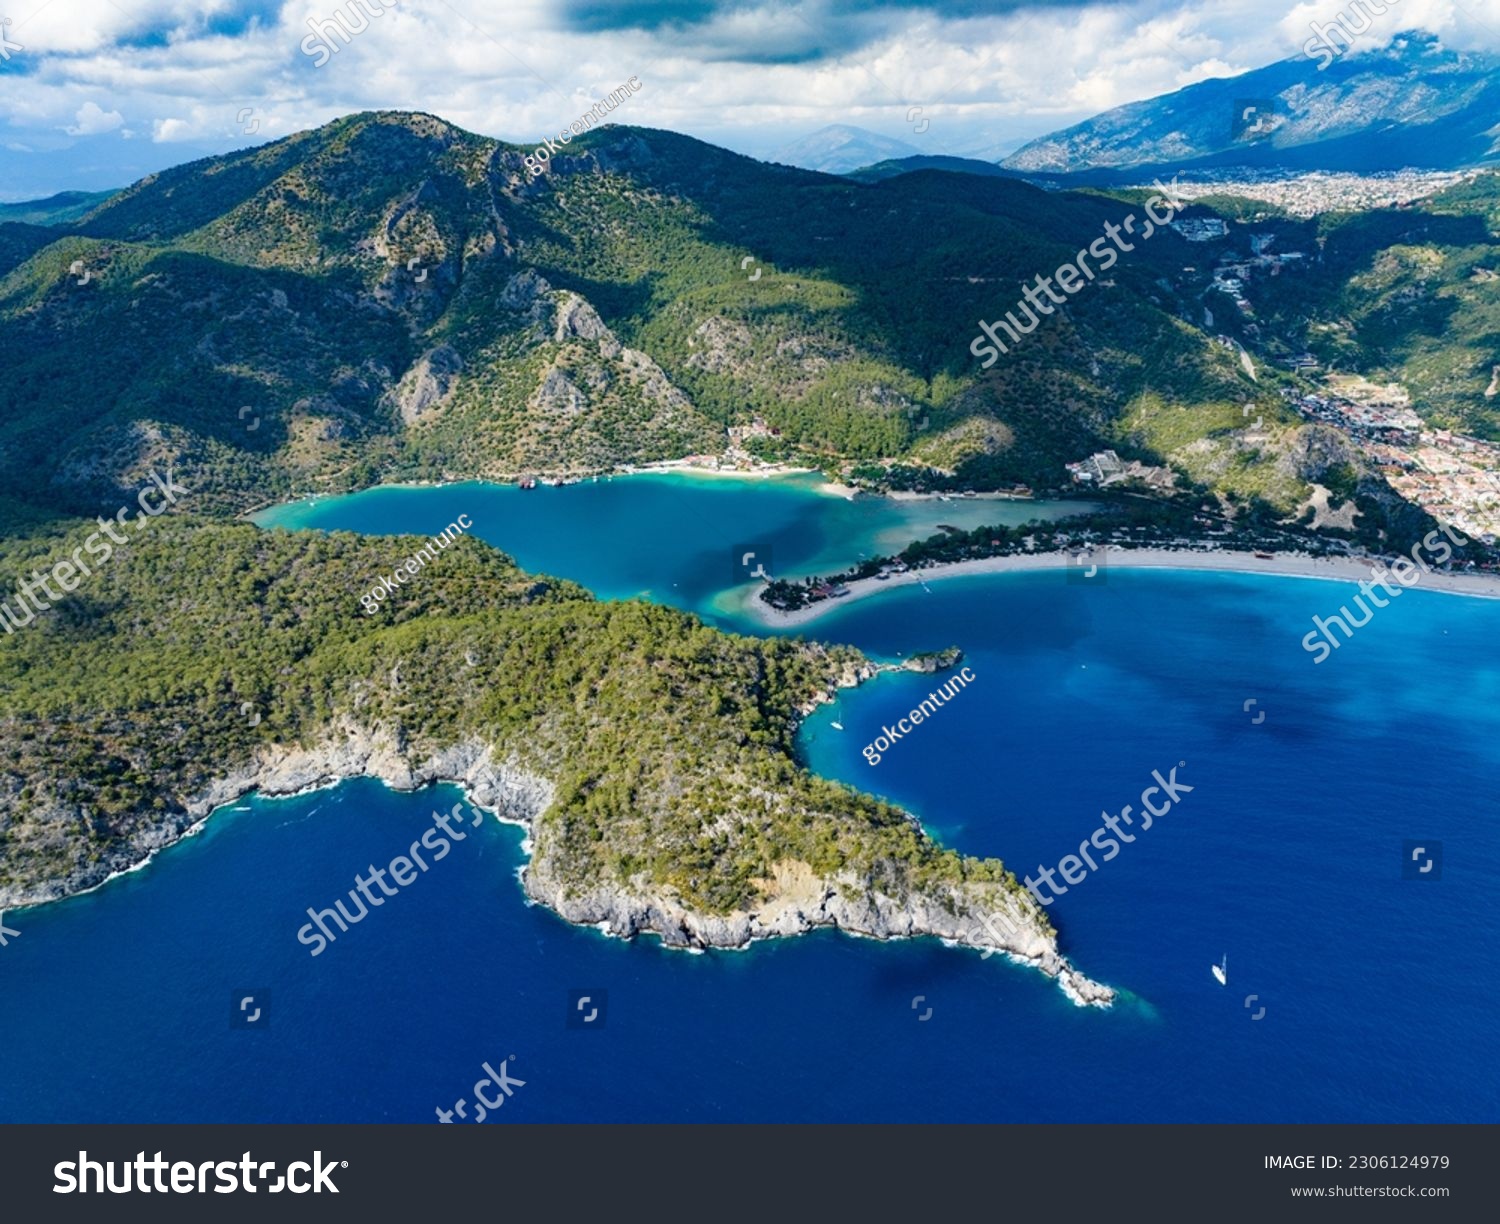 A broad view of Ölüdeniz Bay in Fethiye, Muğla, as seen from a drone. The lush mountains framing the bay enhance the scene's captivating beauty #2306124979